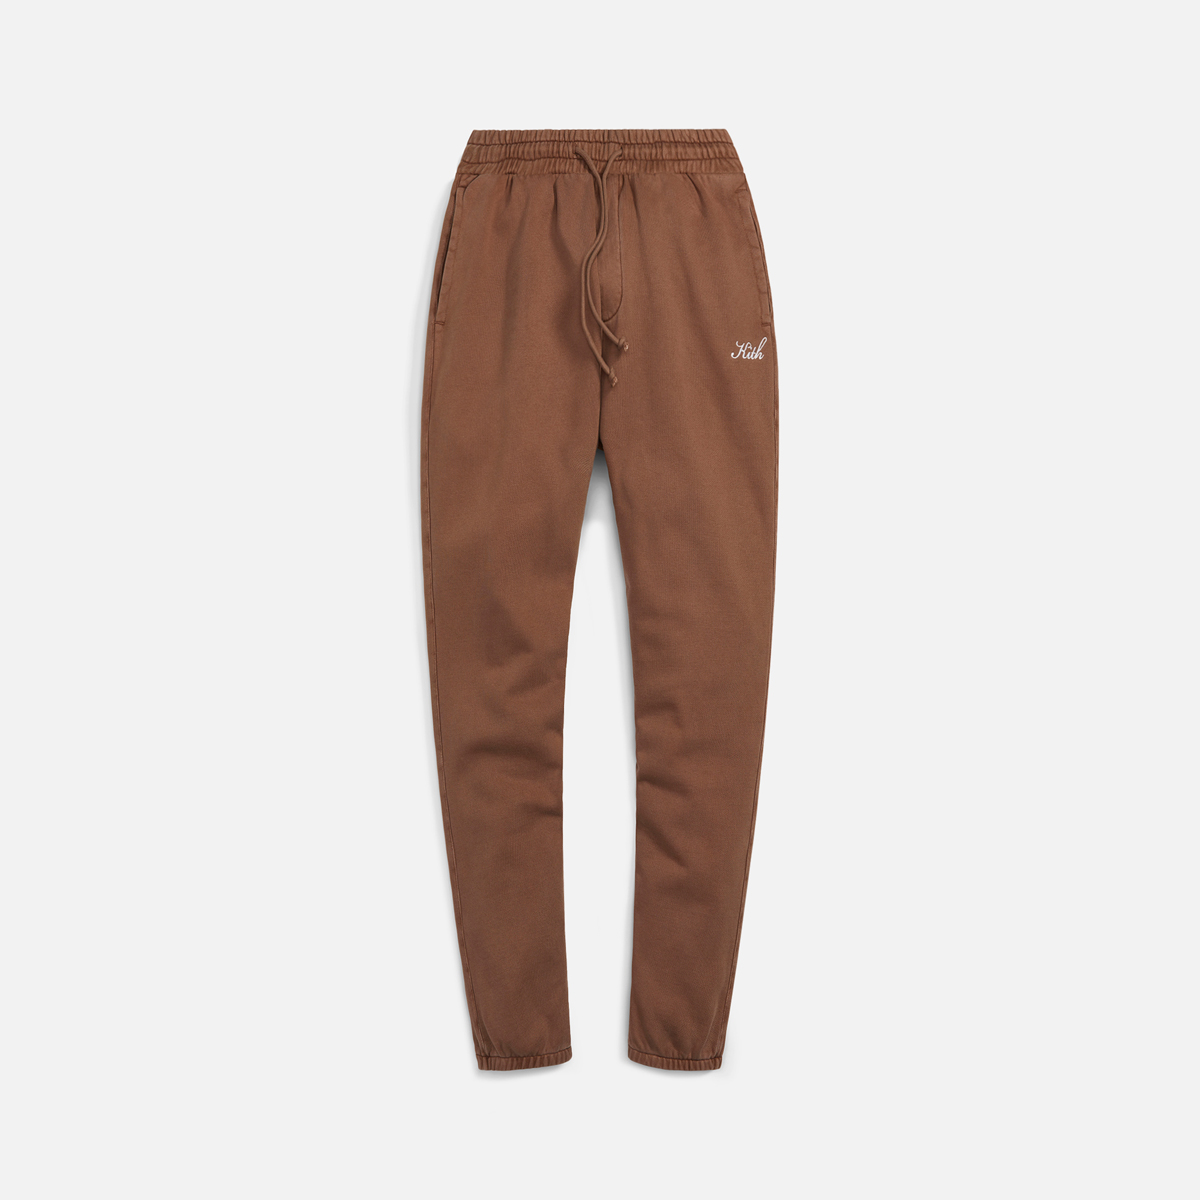 kith-fall-winter-2021-collection-bottoms-14